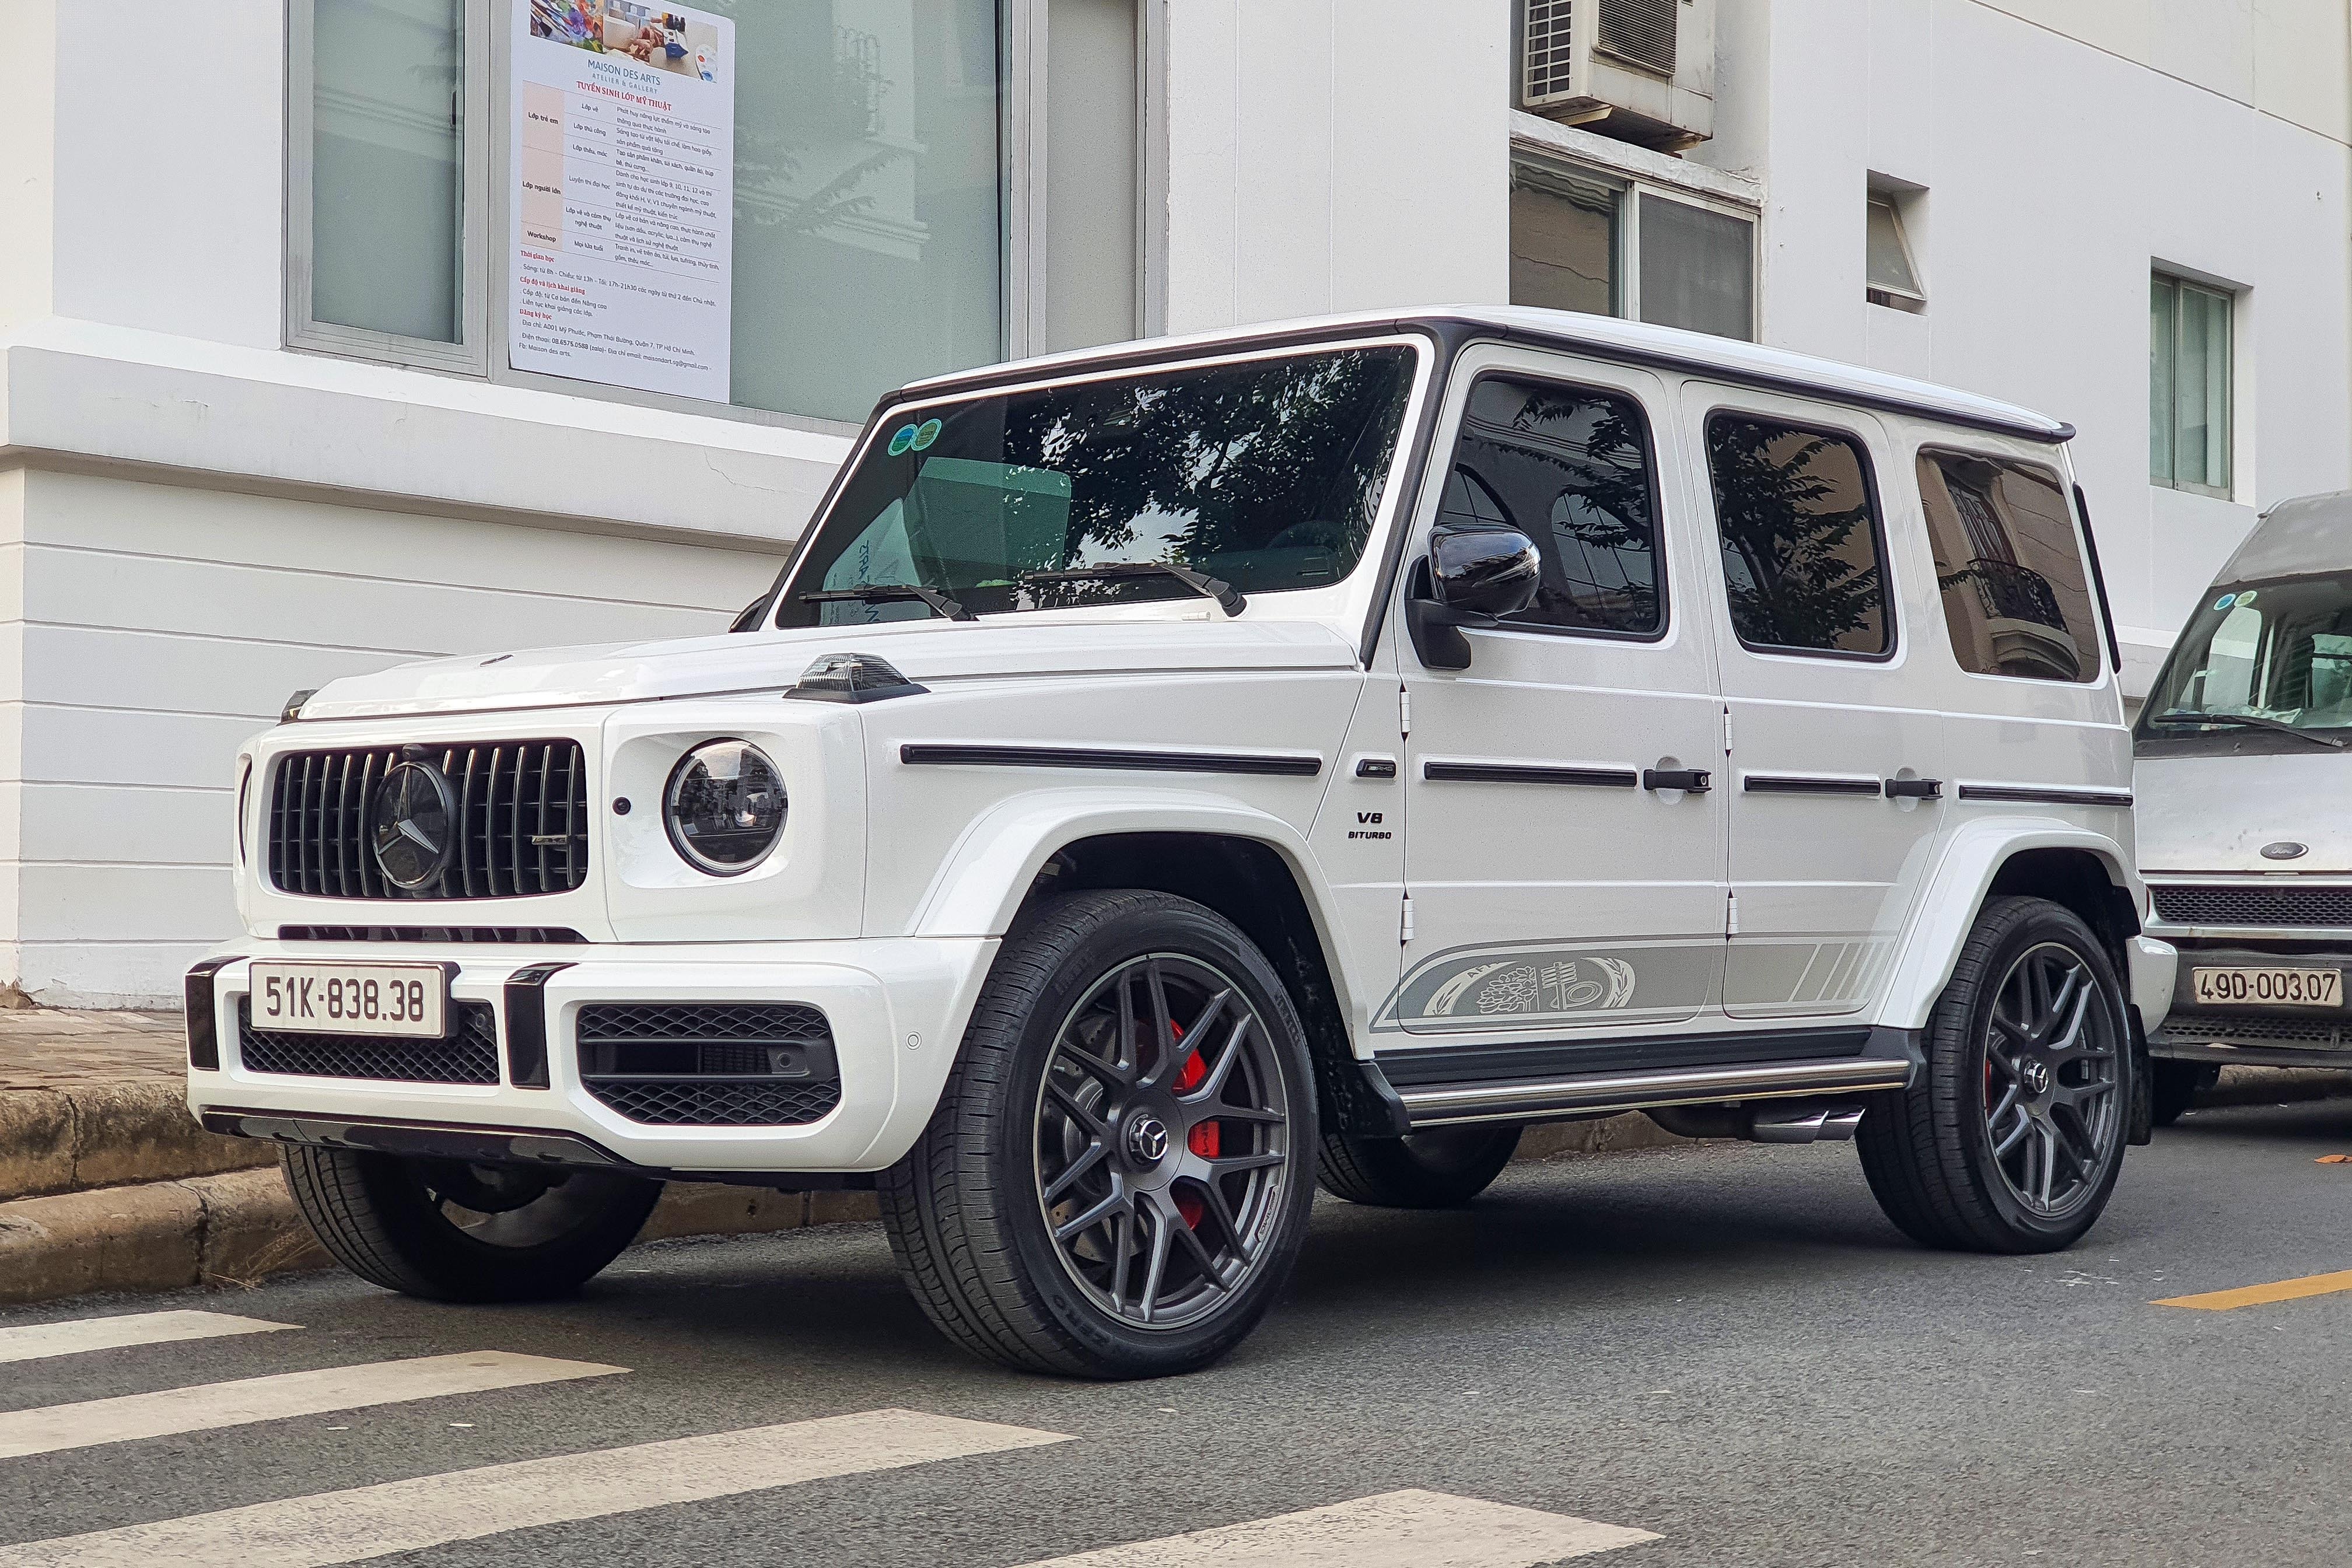 mercedes,  benz,  mercedes-benz,  amg,  mercedes-amg,  g63,  g 63,  edition 55,  g63 edition 55,  suv,  hieu suat cao,  g 63 edition 55 anh 11